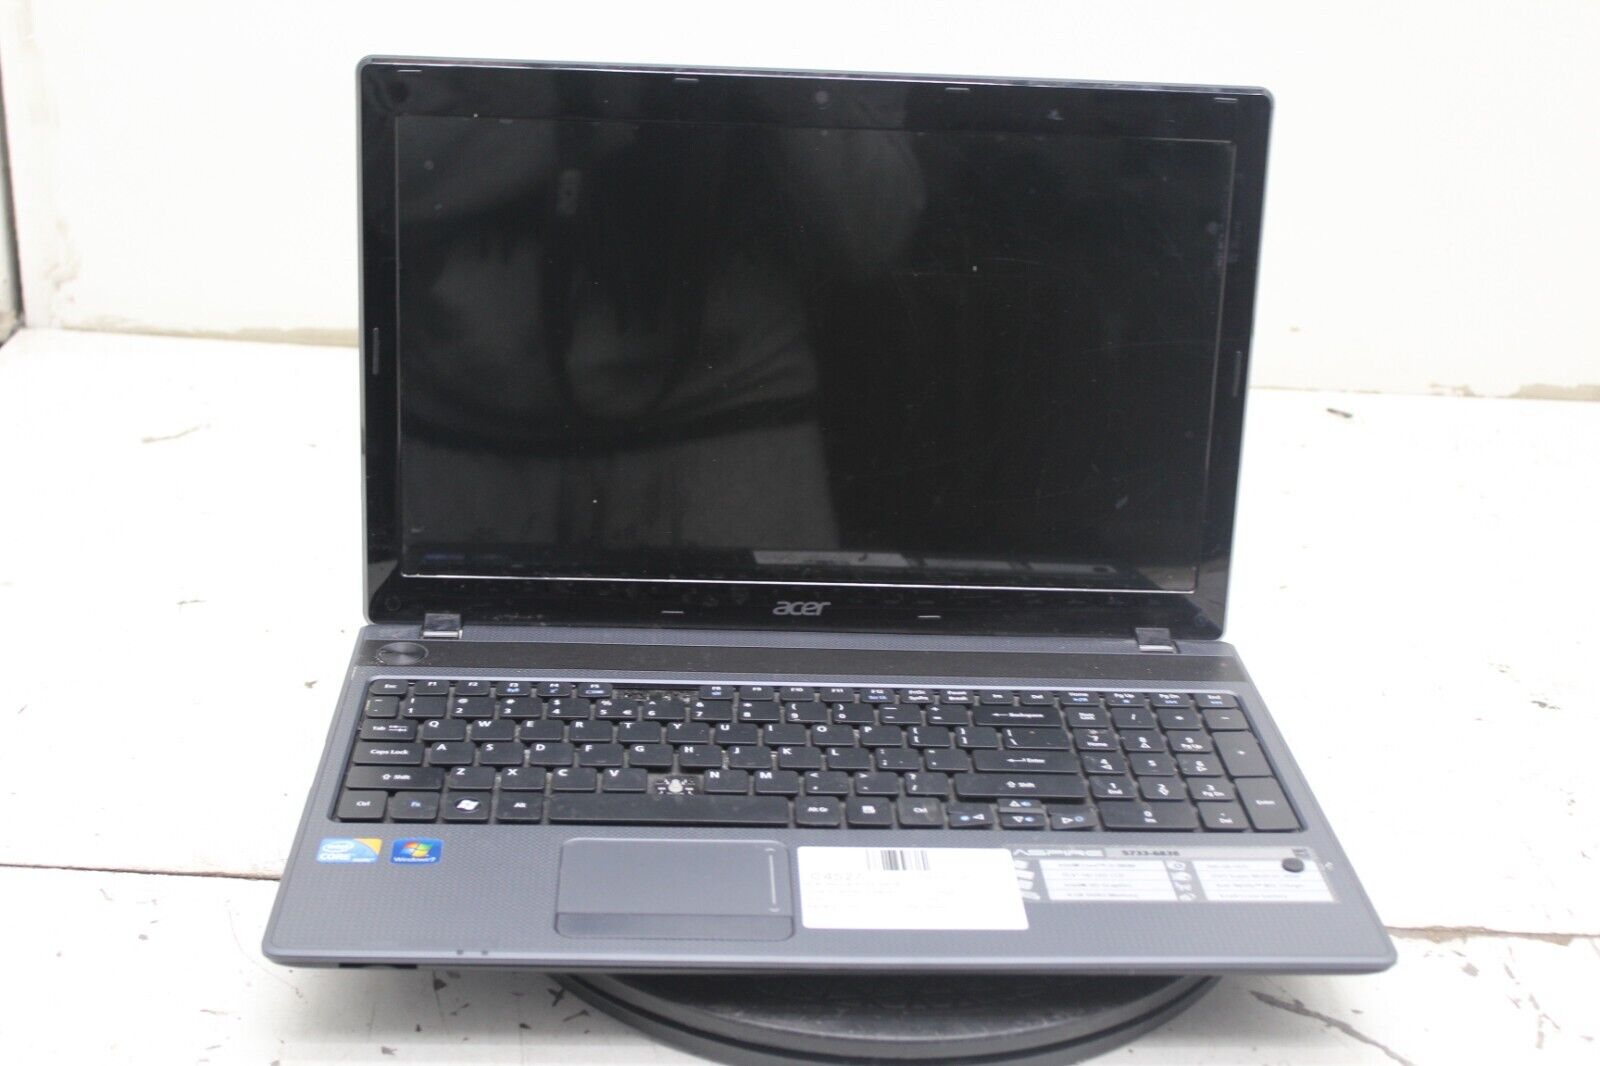 Acer Aspire 5733-6838 Notebook Computer i5-M560 2.6 GHz 4GB NO HDD/Battery/Cover